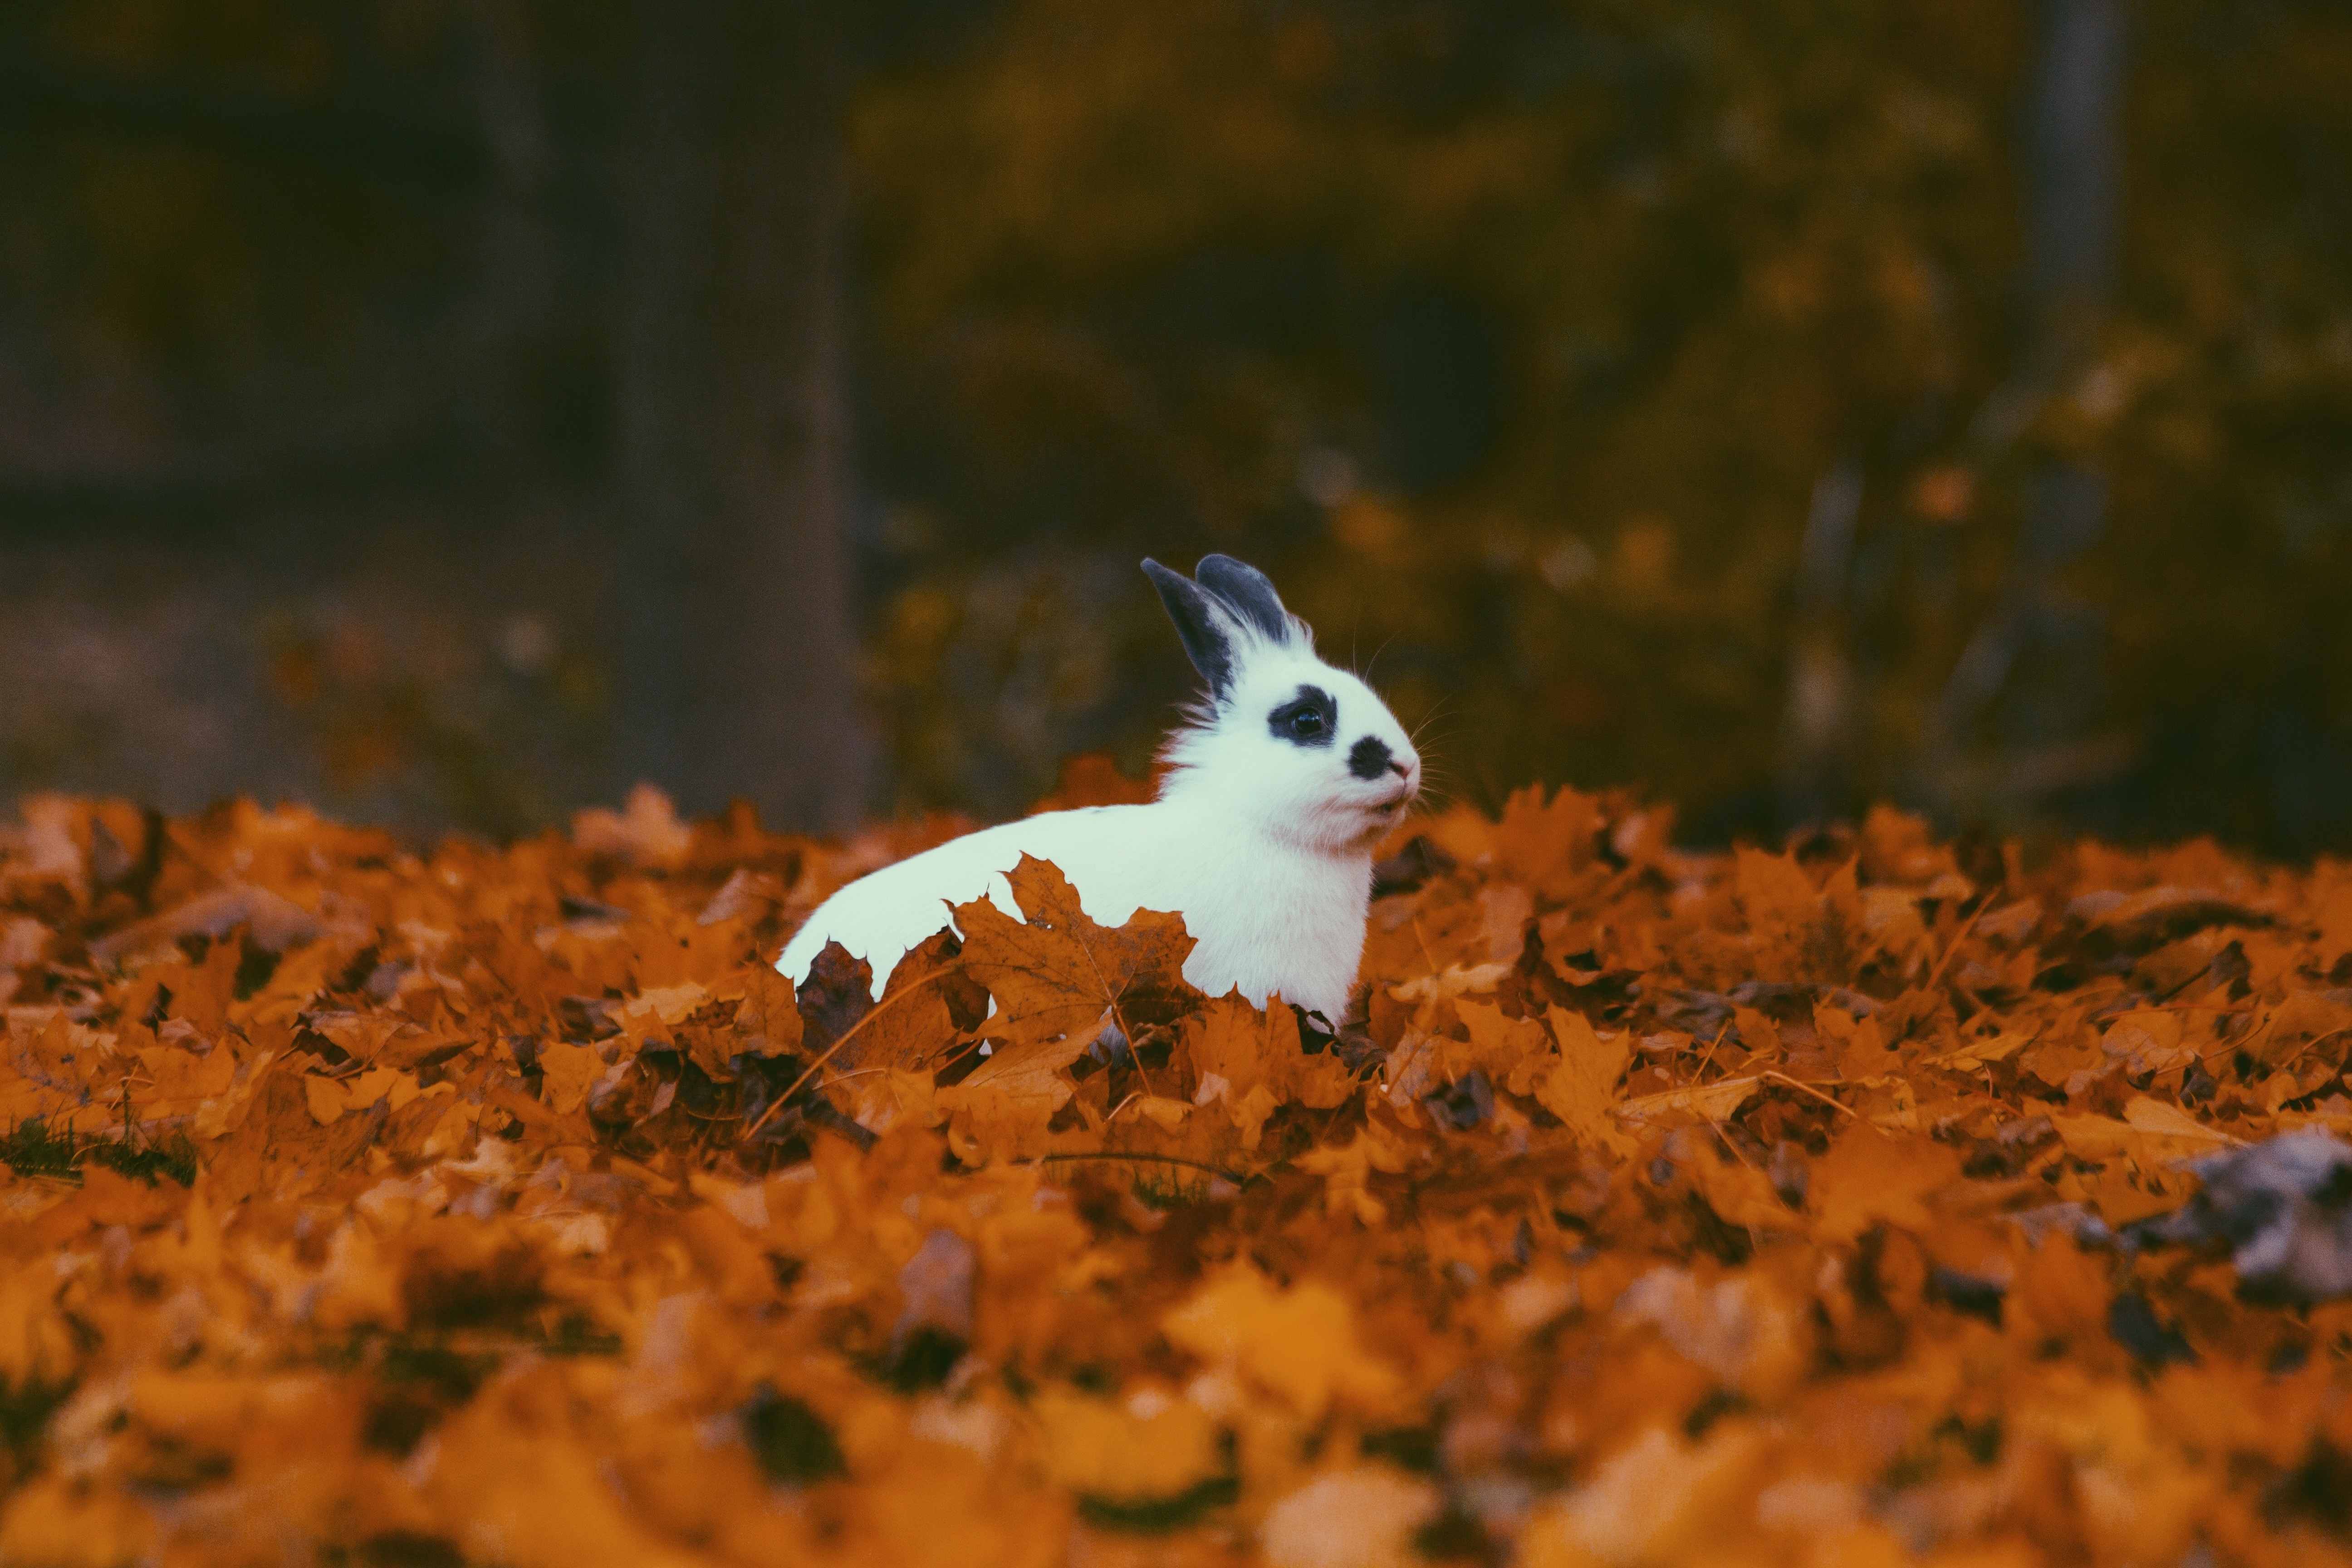 white and black fur rabbit sitting on ground surround by brown dried leaves in forest